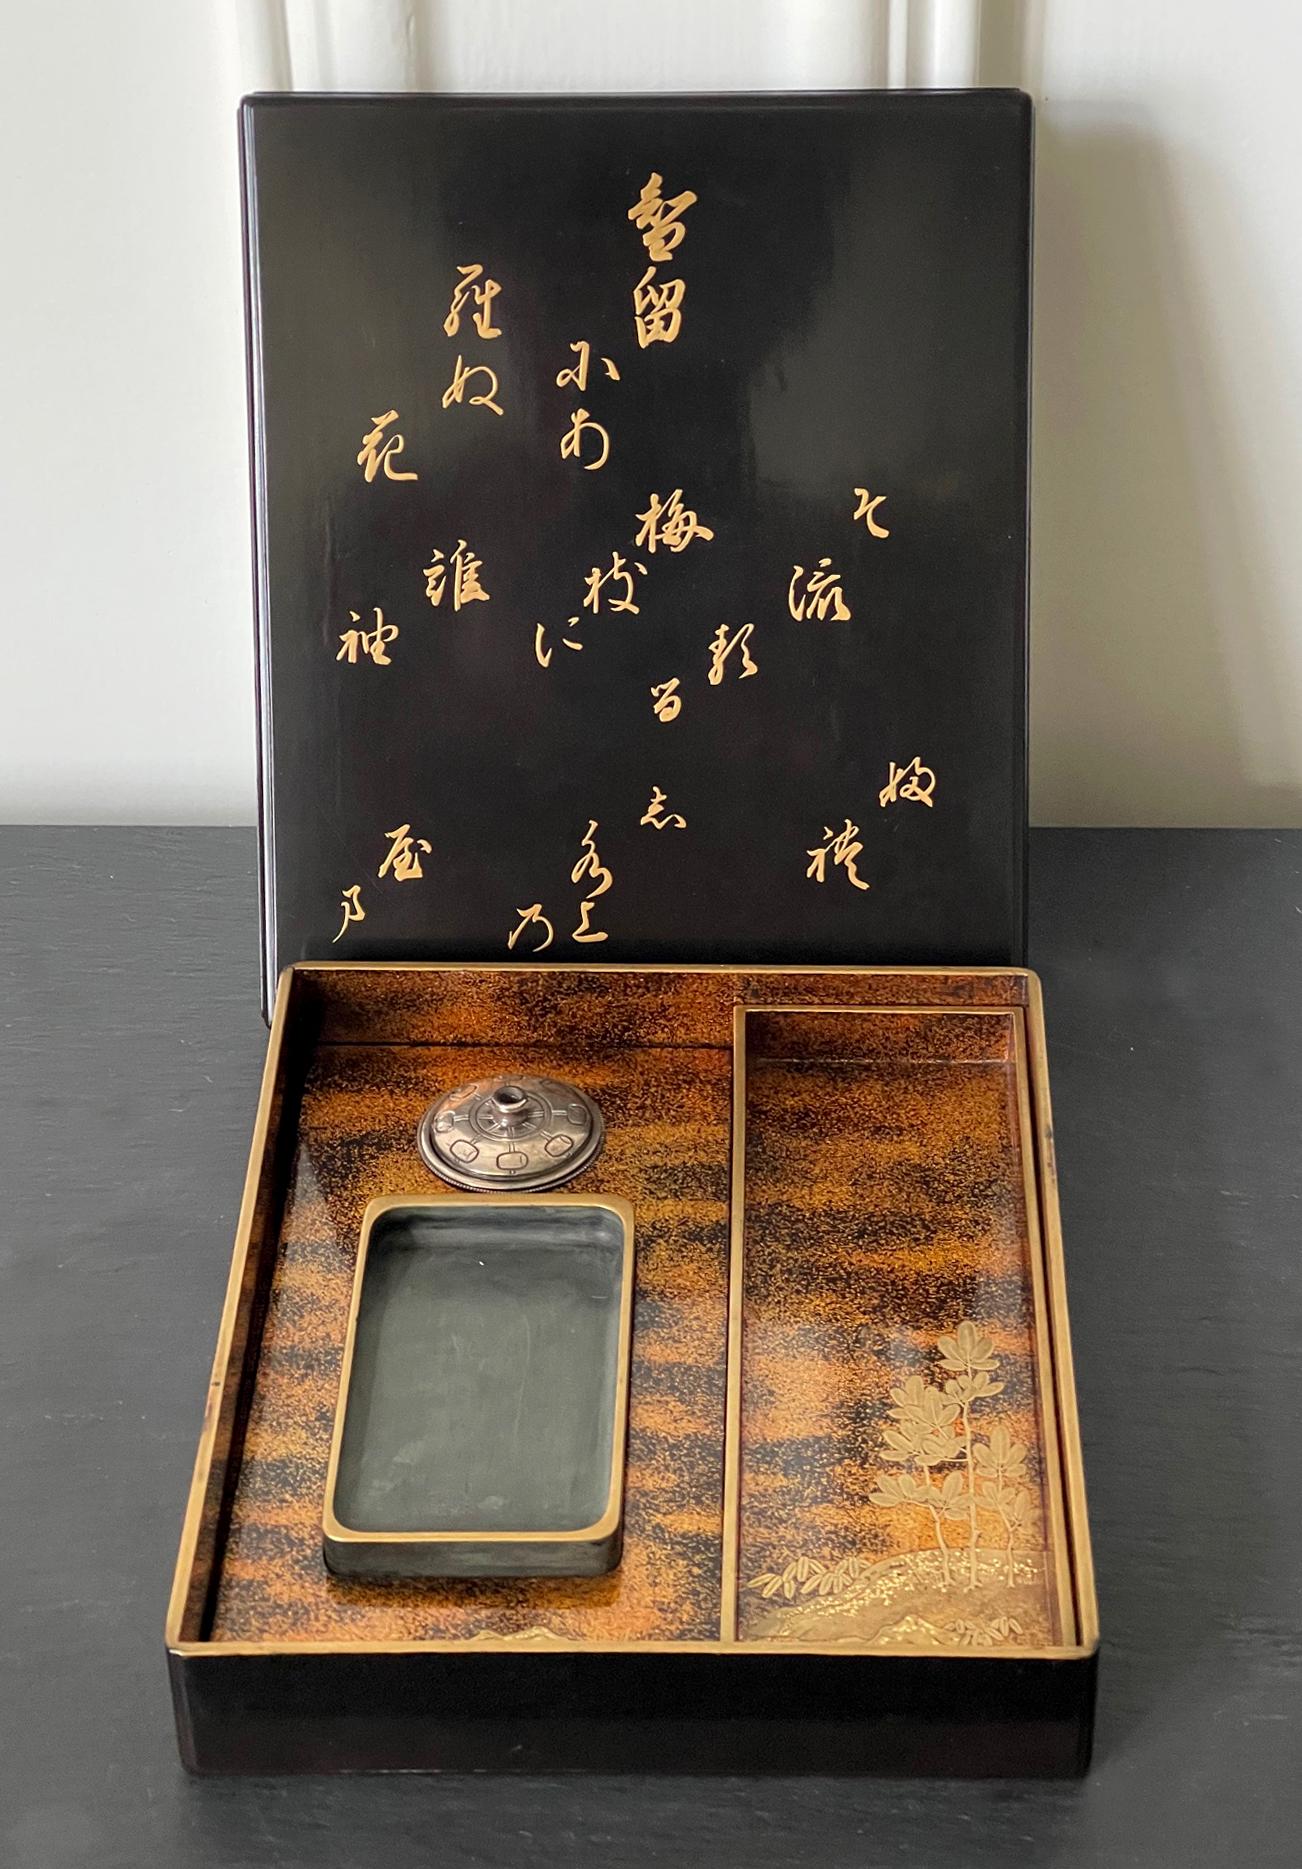 A beautiful Maki-e lacquer suzuribako (the writing box) circa 19th century of Edo period (1615-1868).
The cover of the rectangular box was decorated with one of the twelve waka poems from the anthology Setsugyokushu (Jewels of Snow) compiled by